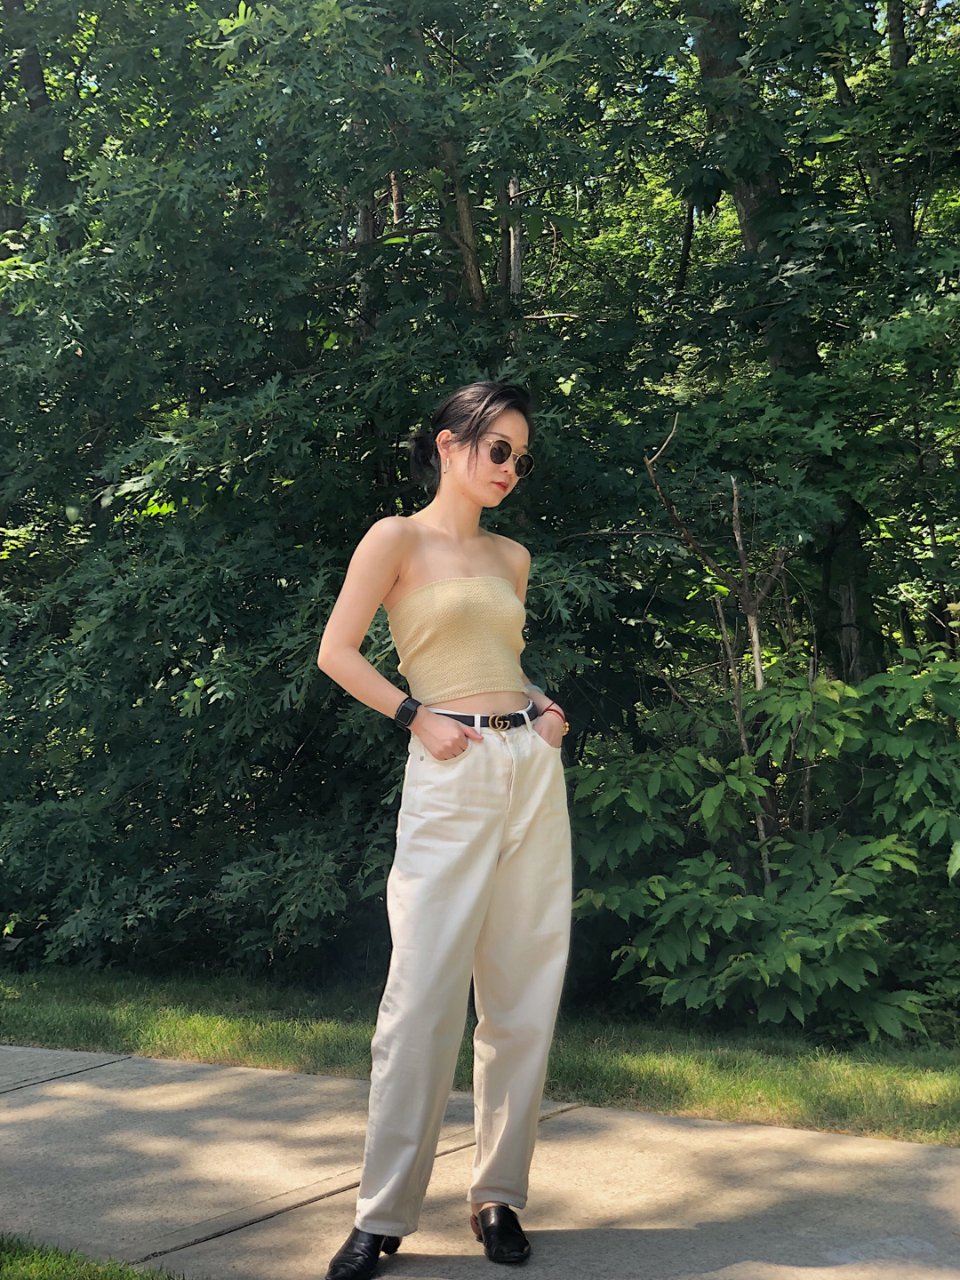 Collection of Style COS,Taobao,Madewell 美德威尔